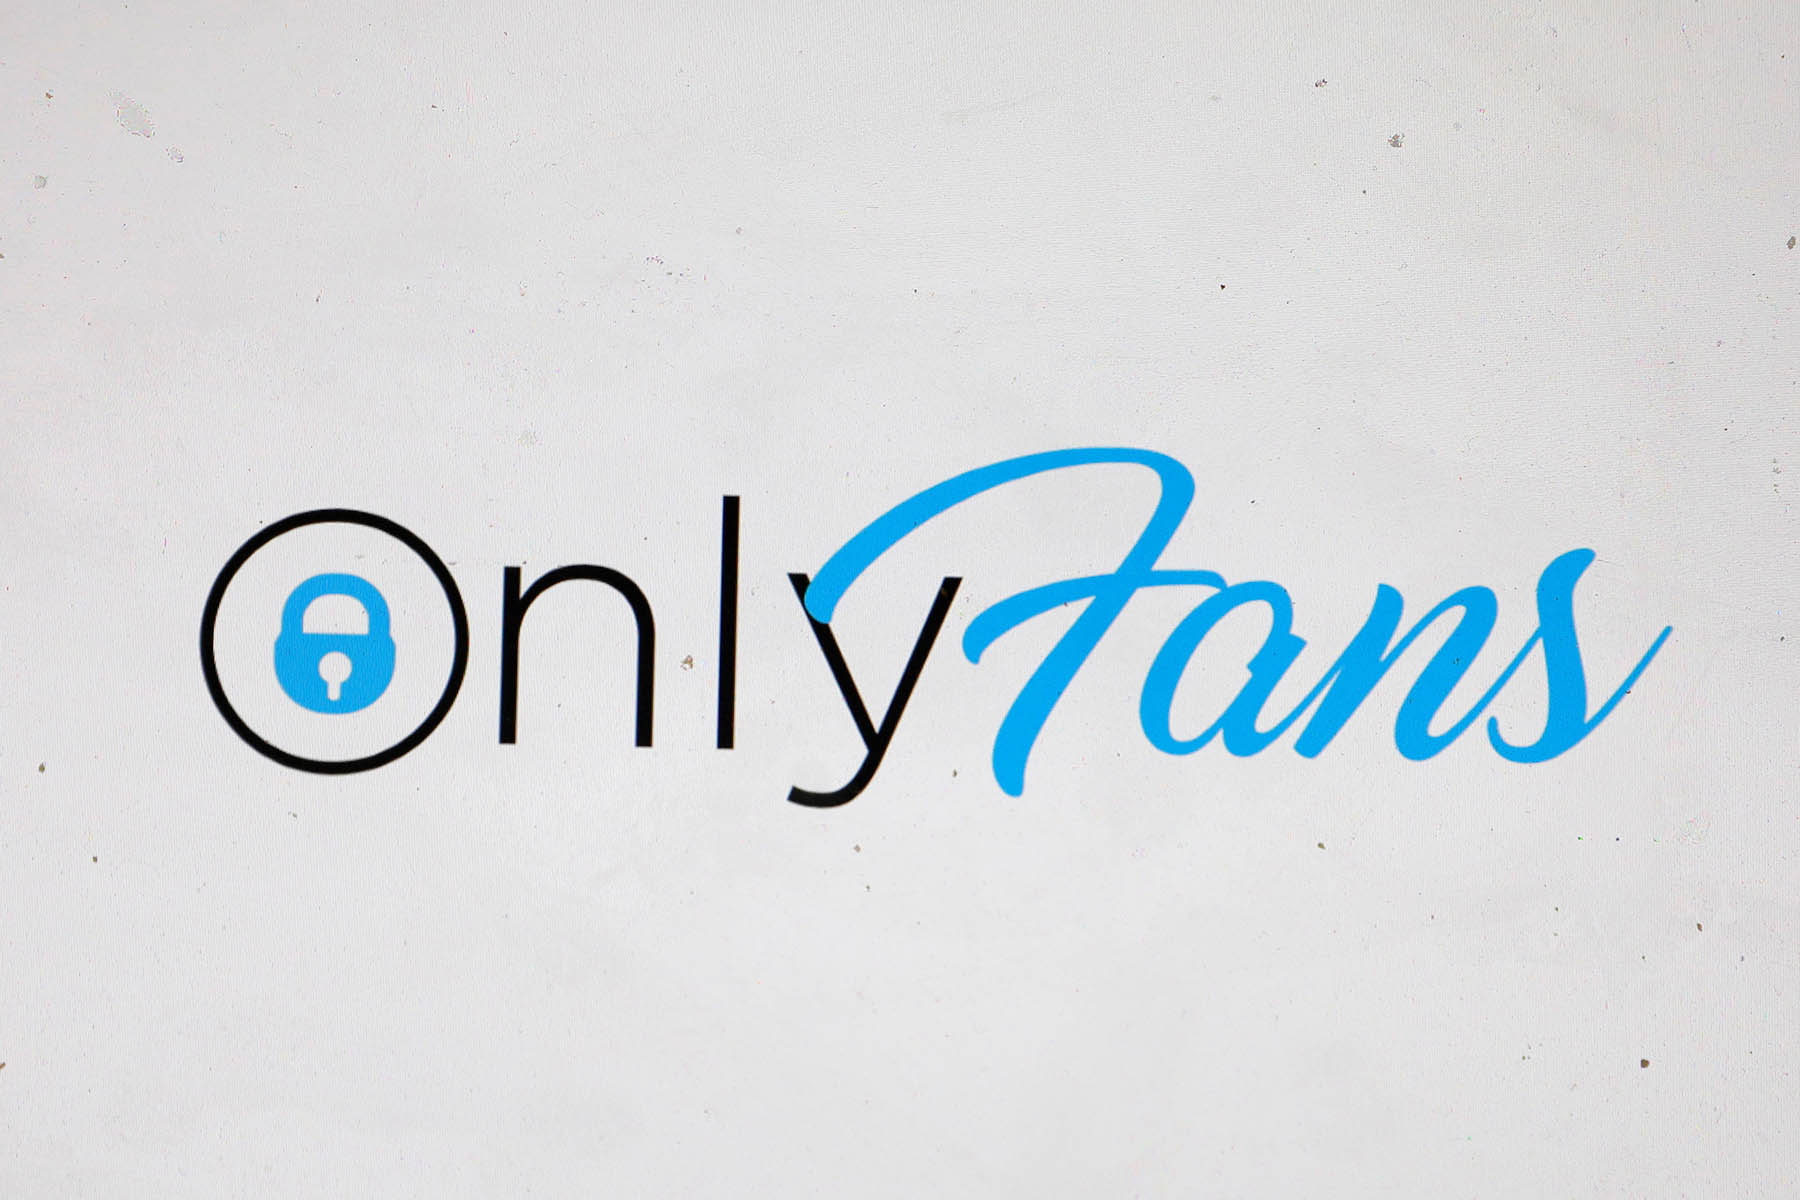 The logo for OnlyFans is seen on a device in this photo illustration in Manhattan, New York City